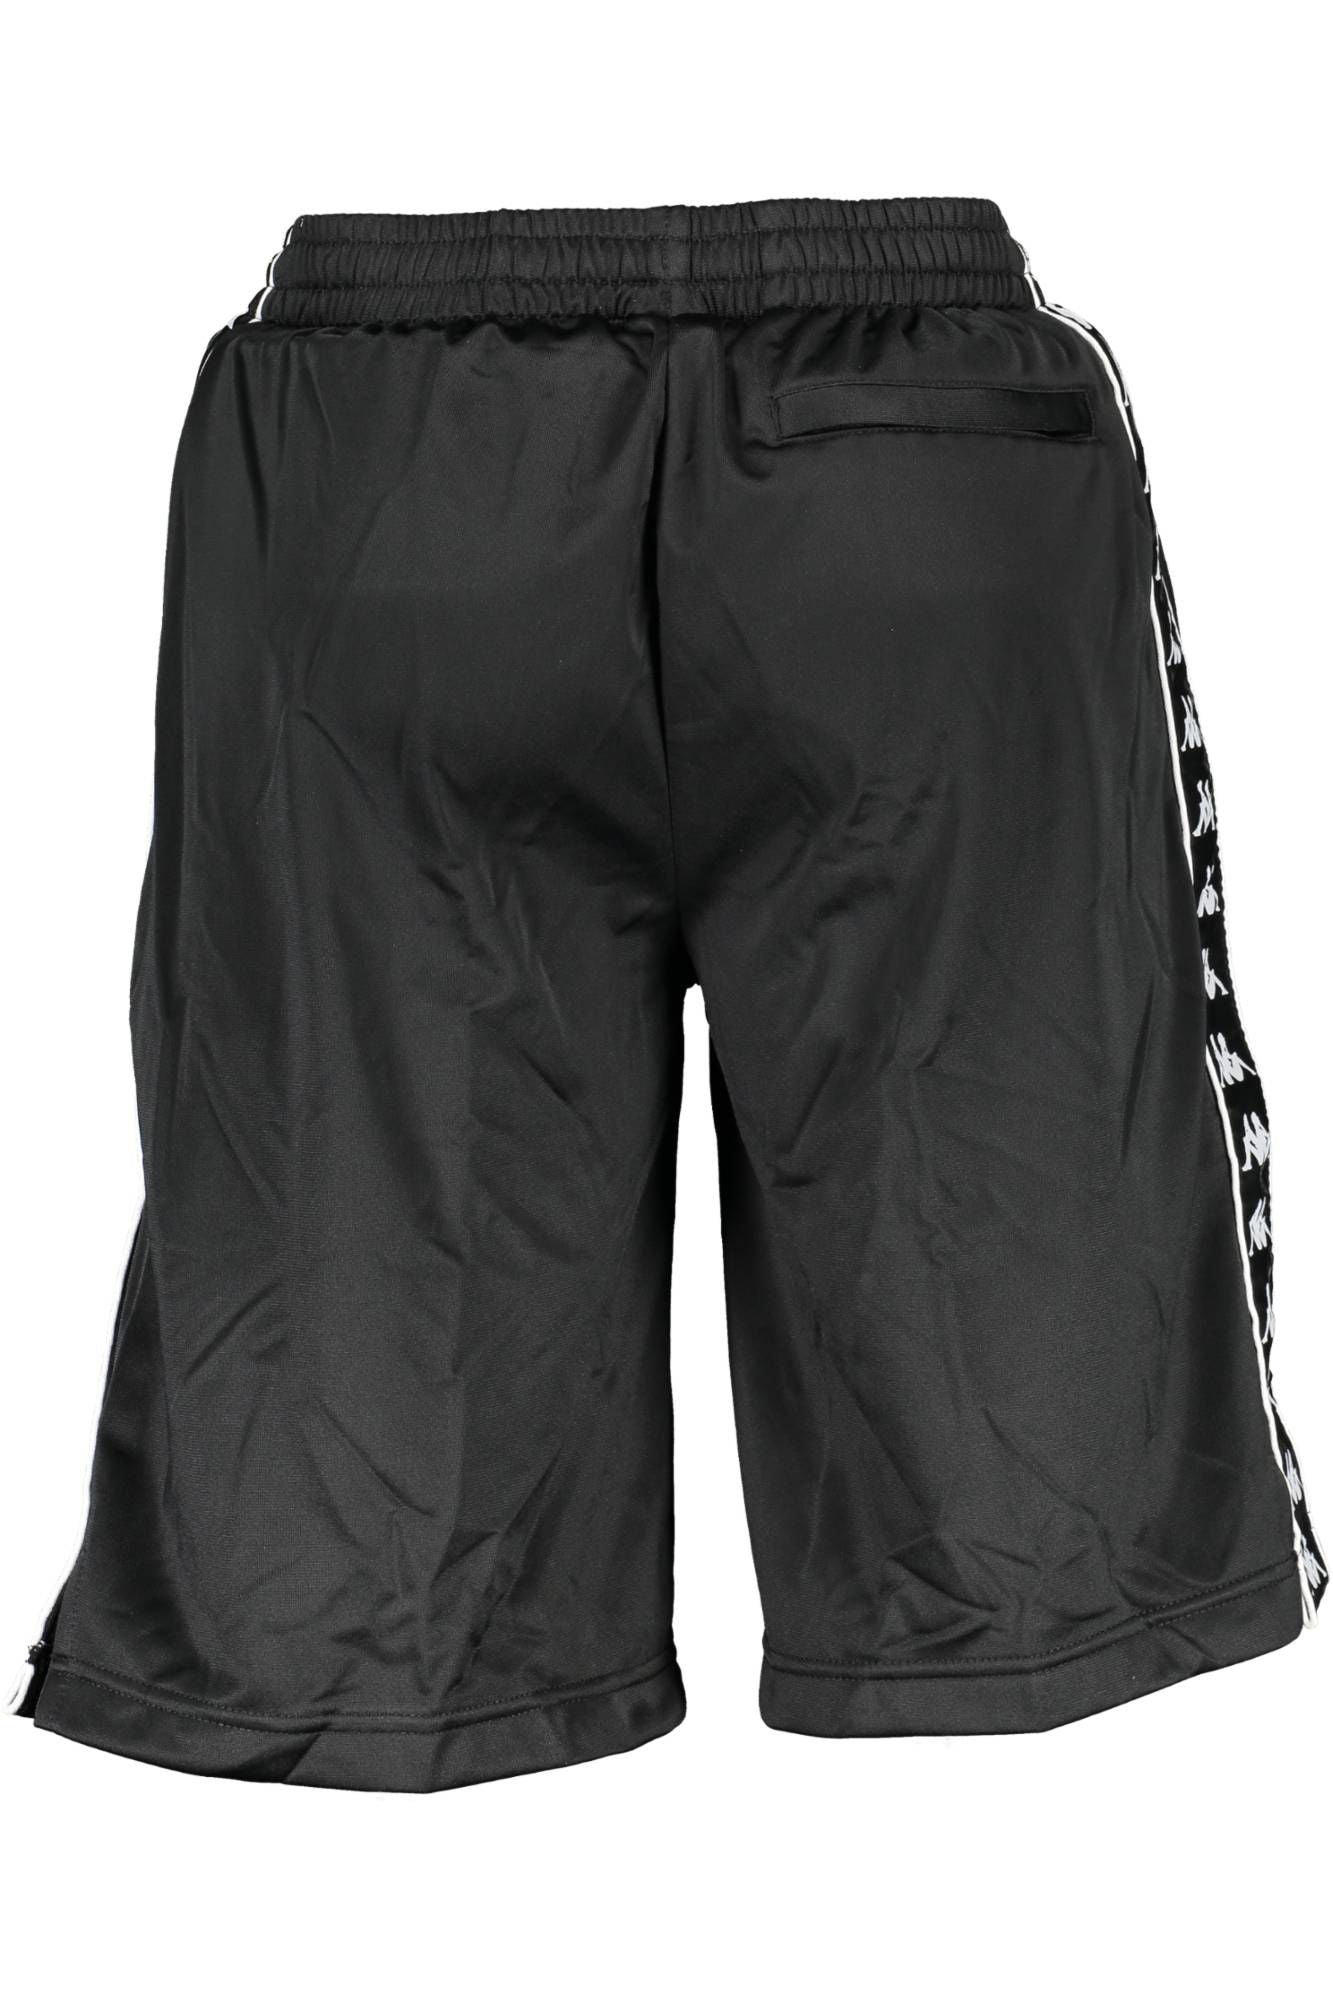 Elegant Active Shorts with Contrasting Details